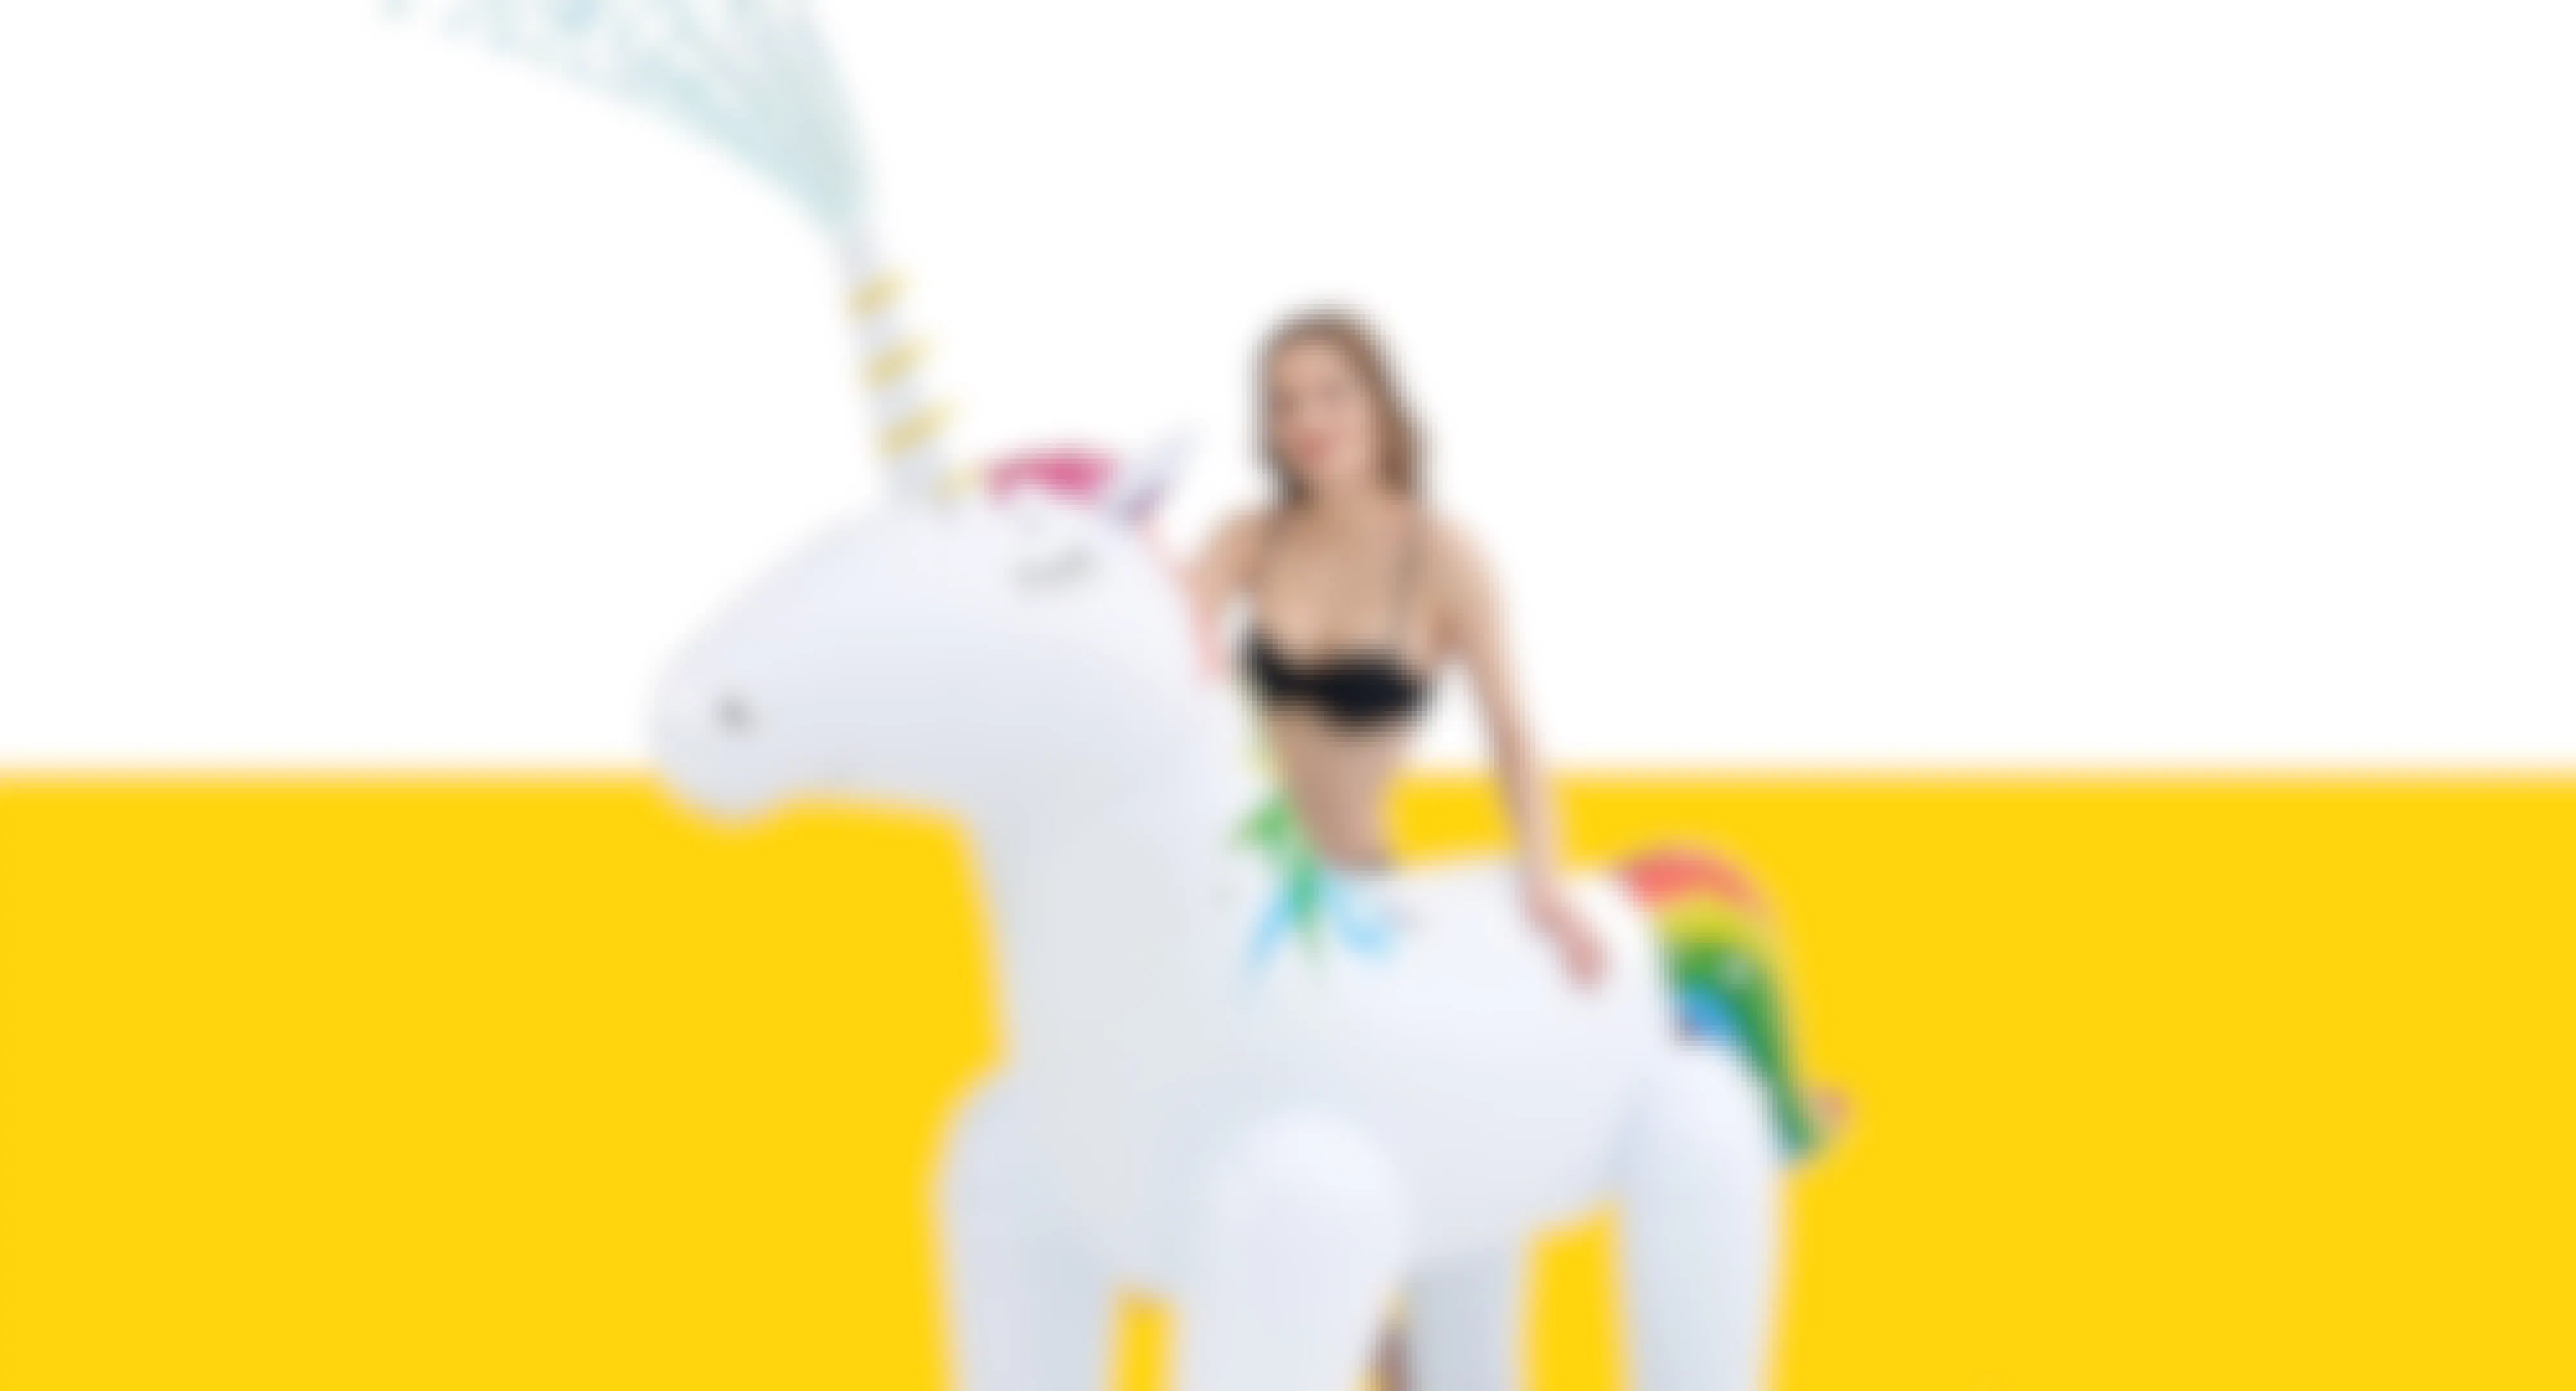 Prime Exclusive: Inflatable Unicorn Toy, Only $21.99 at Amazon